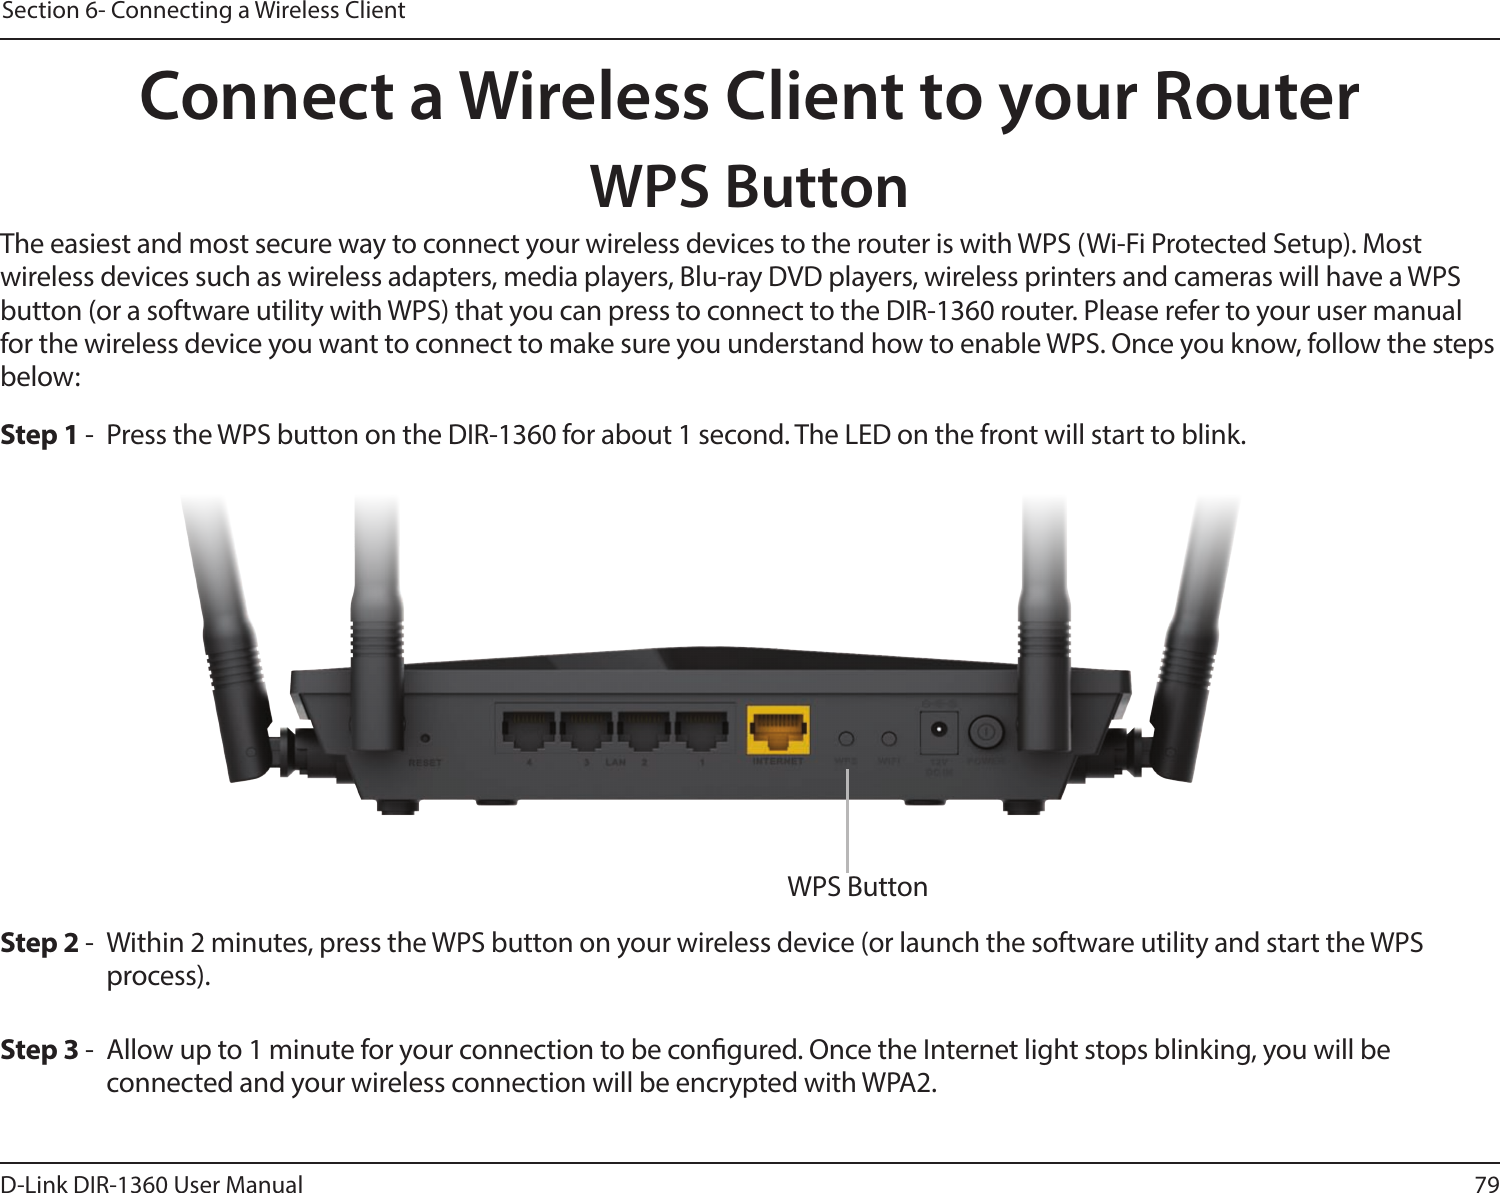 79D-Link DIR-1360 User ManualSection 6- Connecting a Wireless ClientConnect a Wireless Client to your RouterWPS ButtonStep 2 -  Within 2 minutes, press the WPS button on your wireless device (or launch the software utility and start the WPS process).The easiest and most secure way to connect your wireless devices to the router is with WPS (Wi-Fi Protected Setup). Most wireless devices such as wireless adapters, media players, Blu-ray DVD players, wireless printers and cameras will have a WPS button (or a software utility with WPS) that you can press to connect to the DIR-1360 router. Please refer to your user manual for the wireless device you want to connect to make sure you understand how to enable WPS. Once you know, follow the steps below:Step 1 -  Press the WPS button on the DIR-1360 for about 1 second. The LED on the front will start to blink.Step 3 -  Allow up to 1 minute for your connection to be congured. Once the Internet light stops blinking, you will be connected and your wireless connection will be encrypted with WPA2.WPS Button